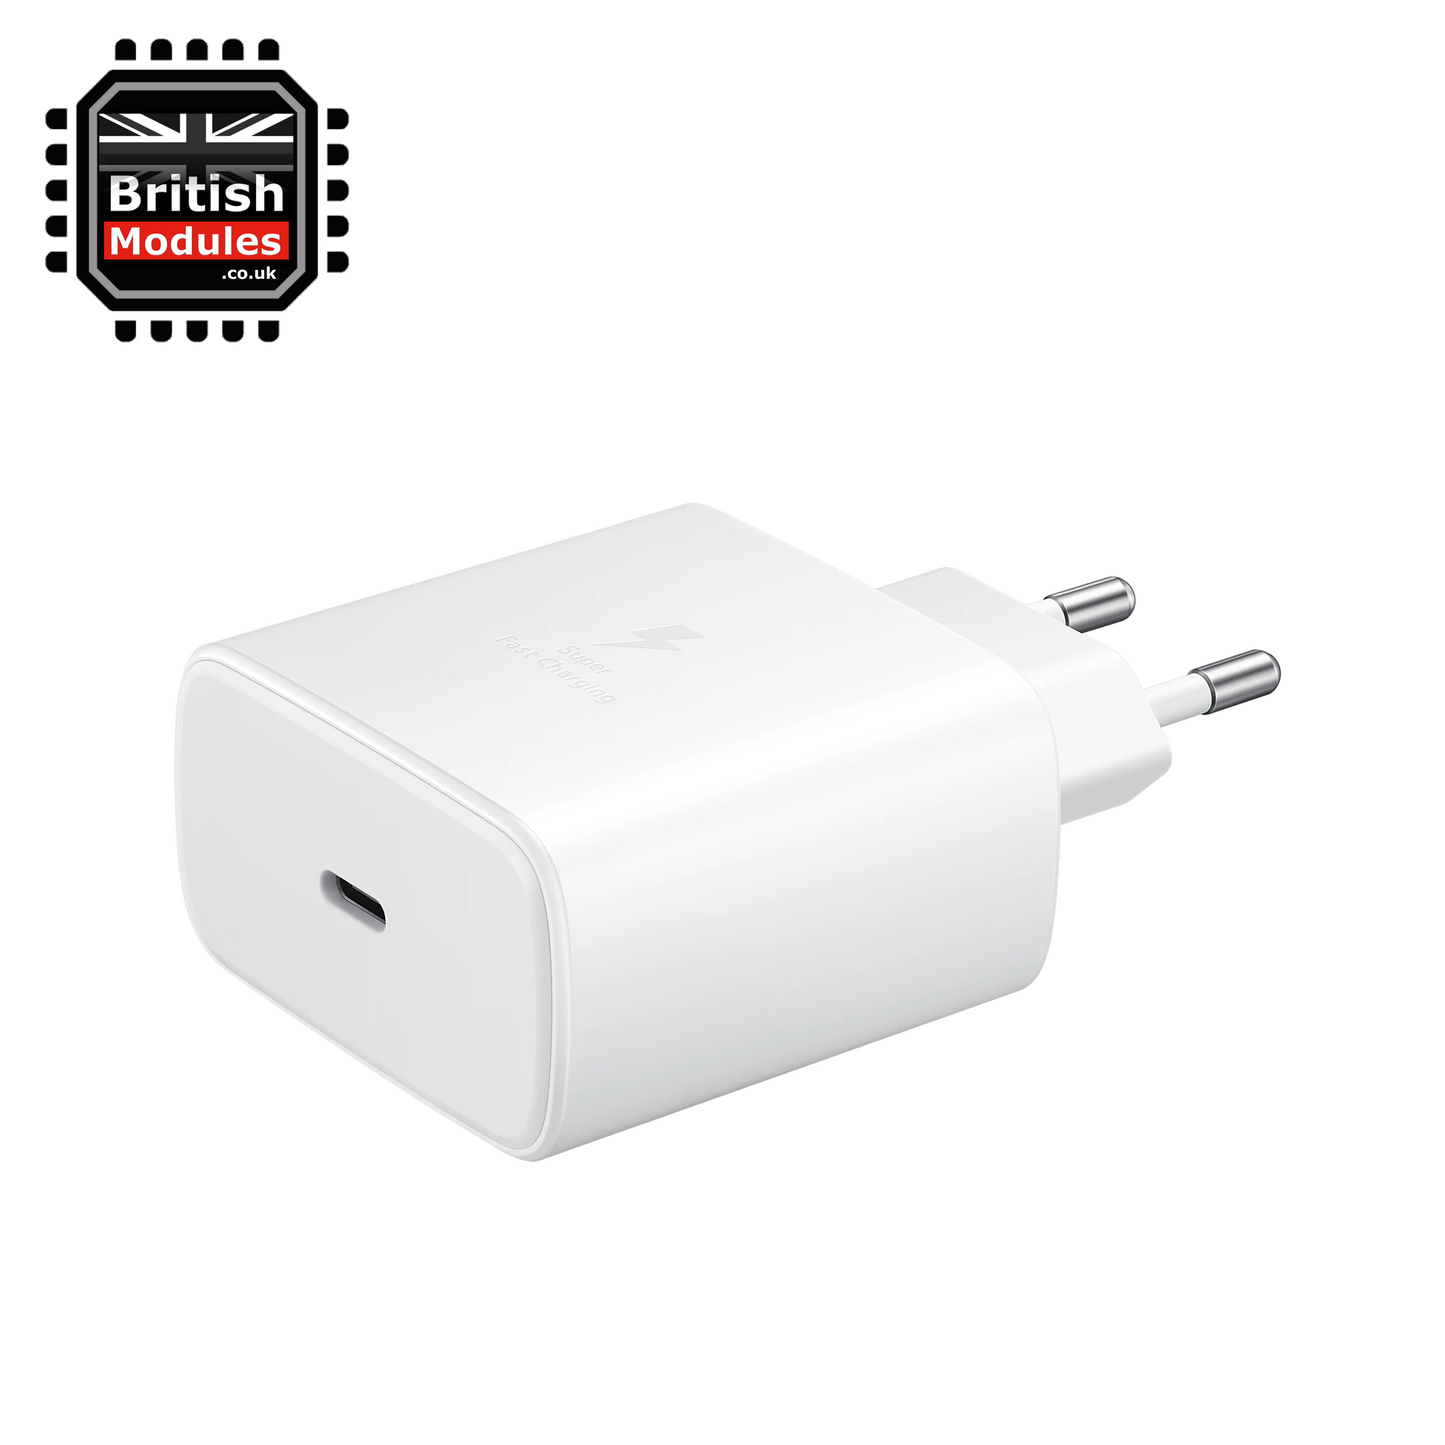 Samsung 45W Travel Adapter TA845 EU USB-C Mains Charger & Super Fast Charging USB-C to USB-C Cable 1M White